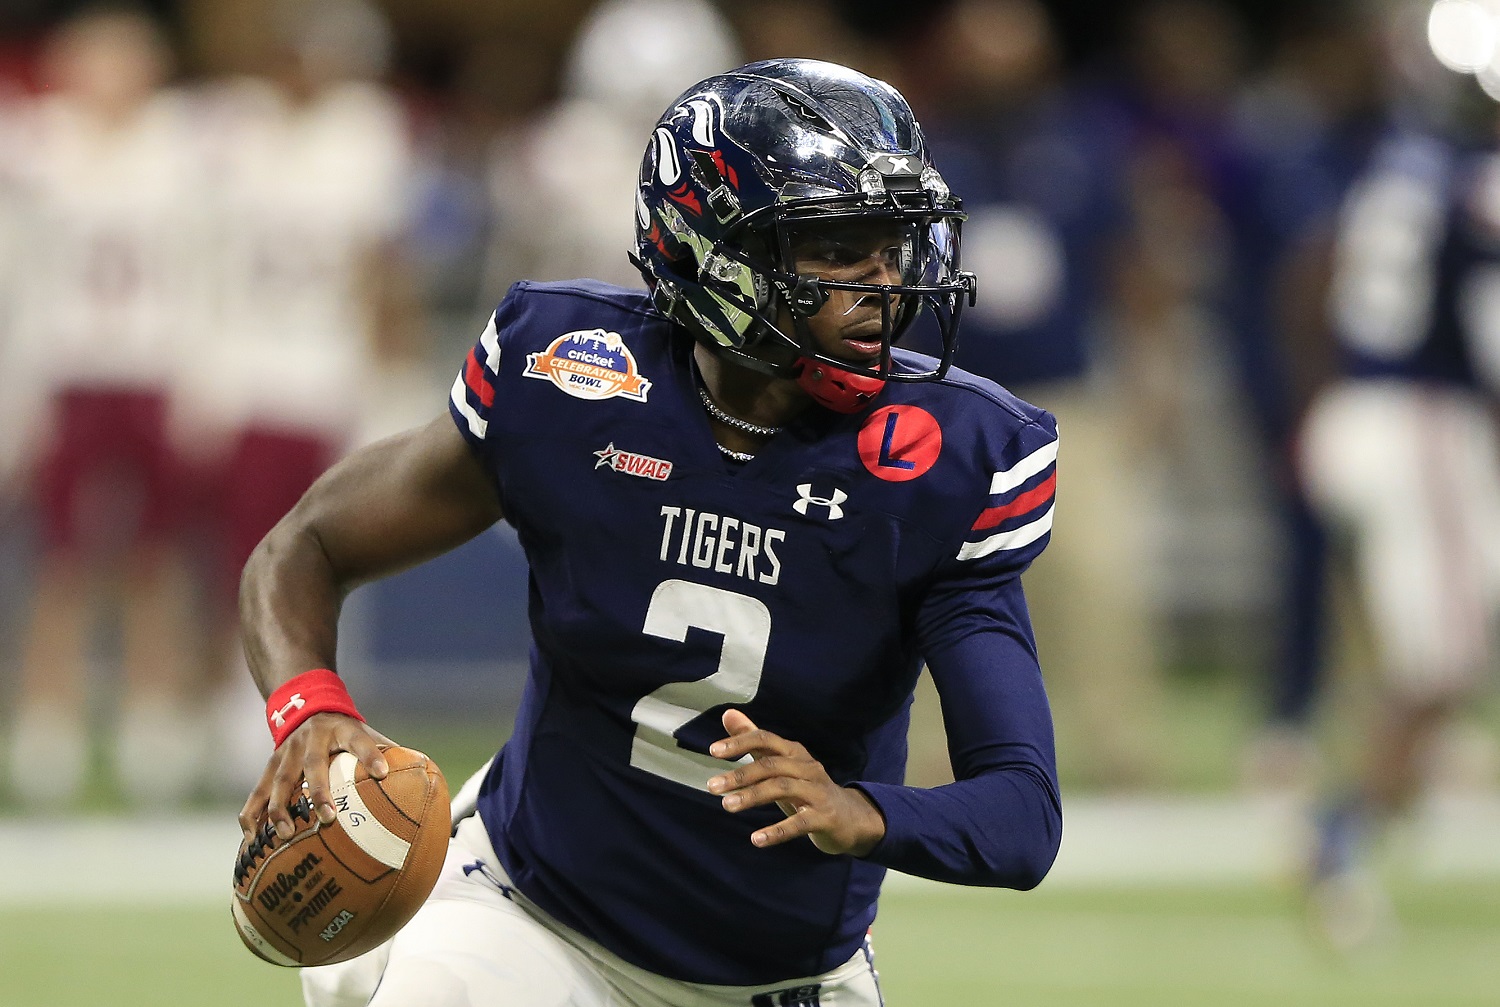 Quarterback Shedeur Sanders of the Jackson State Tigers looks for a receiver during the college football Cricket Celebration Bowl against the South Carolina State Bulldogs on Dec. 18, 2021 at the Mercedes-Benz Stadium in Atlanta, Georgia.